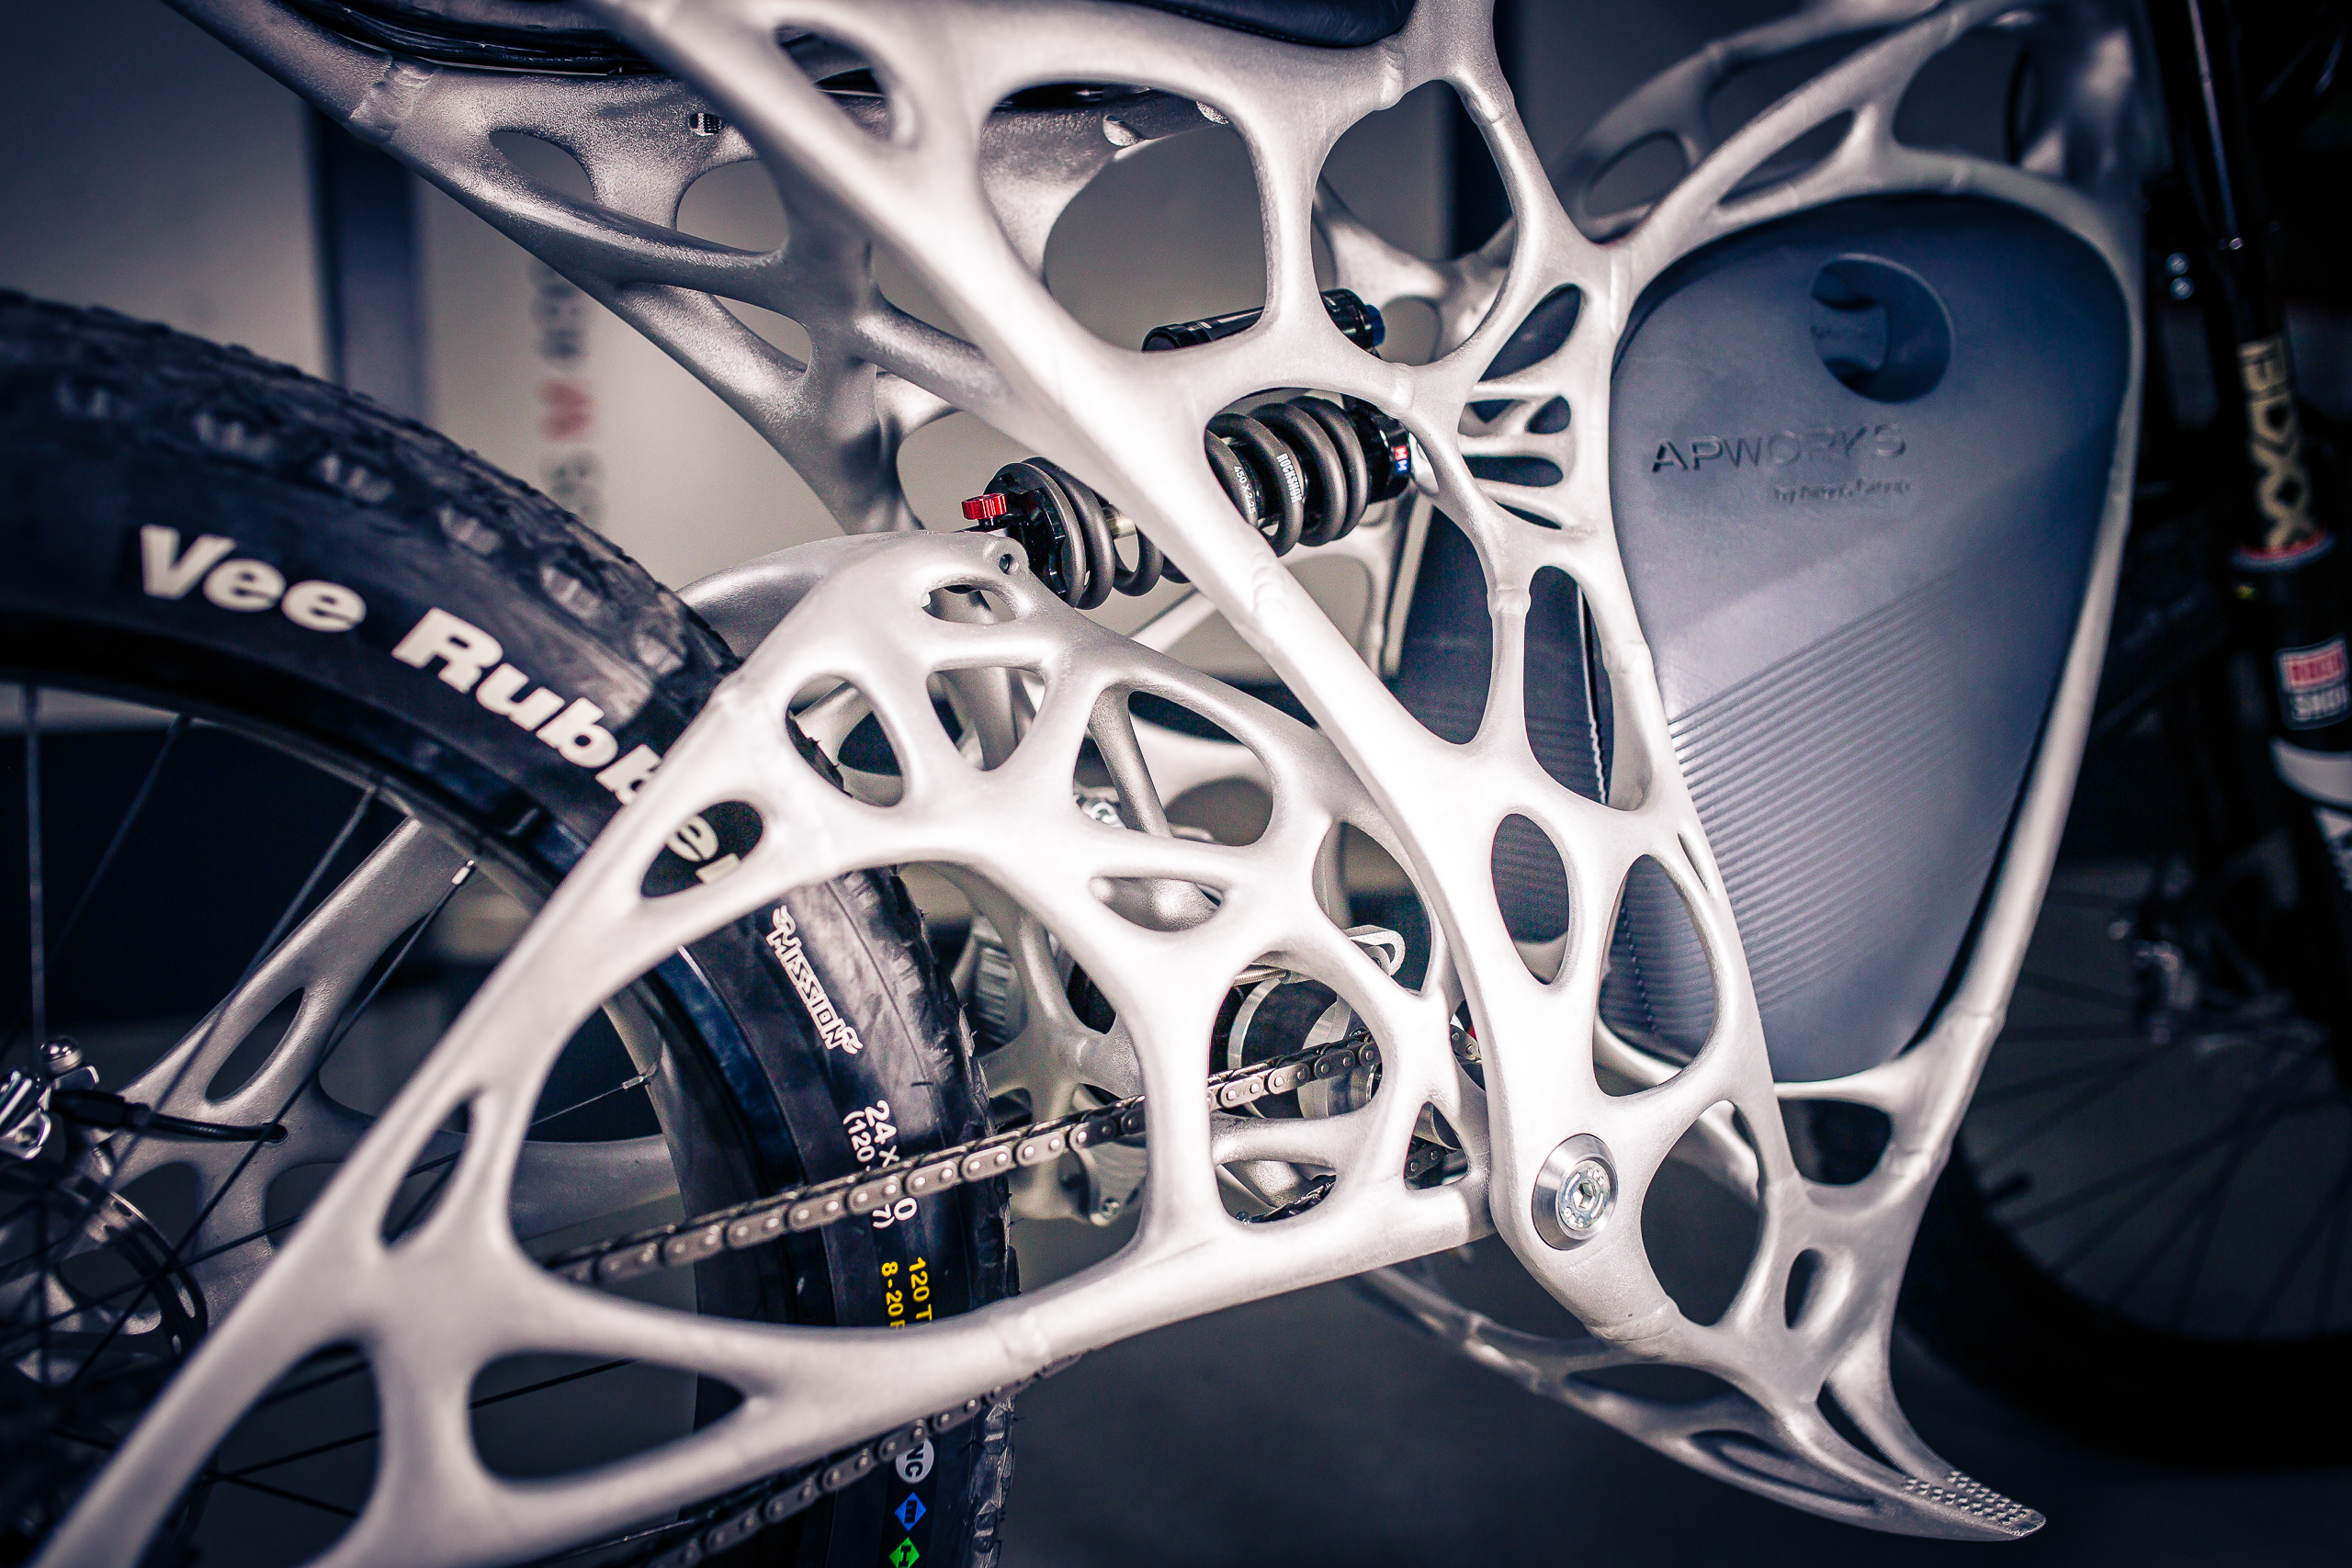 You Can Buy This Crazy, Alien-Like 3D Printed Electric Motorcycle